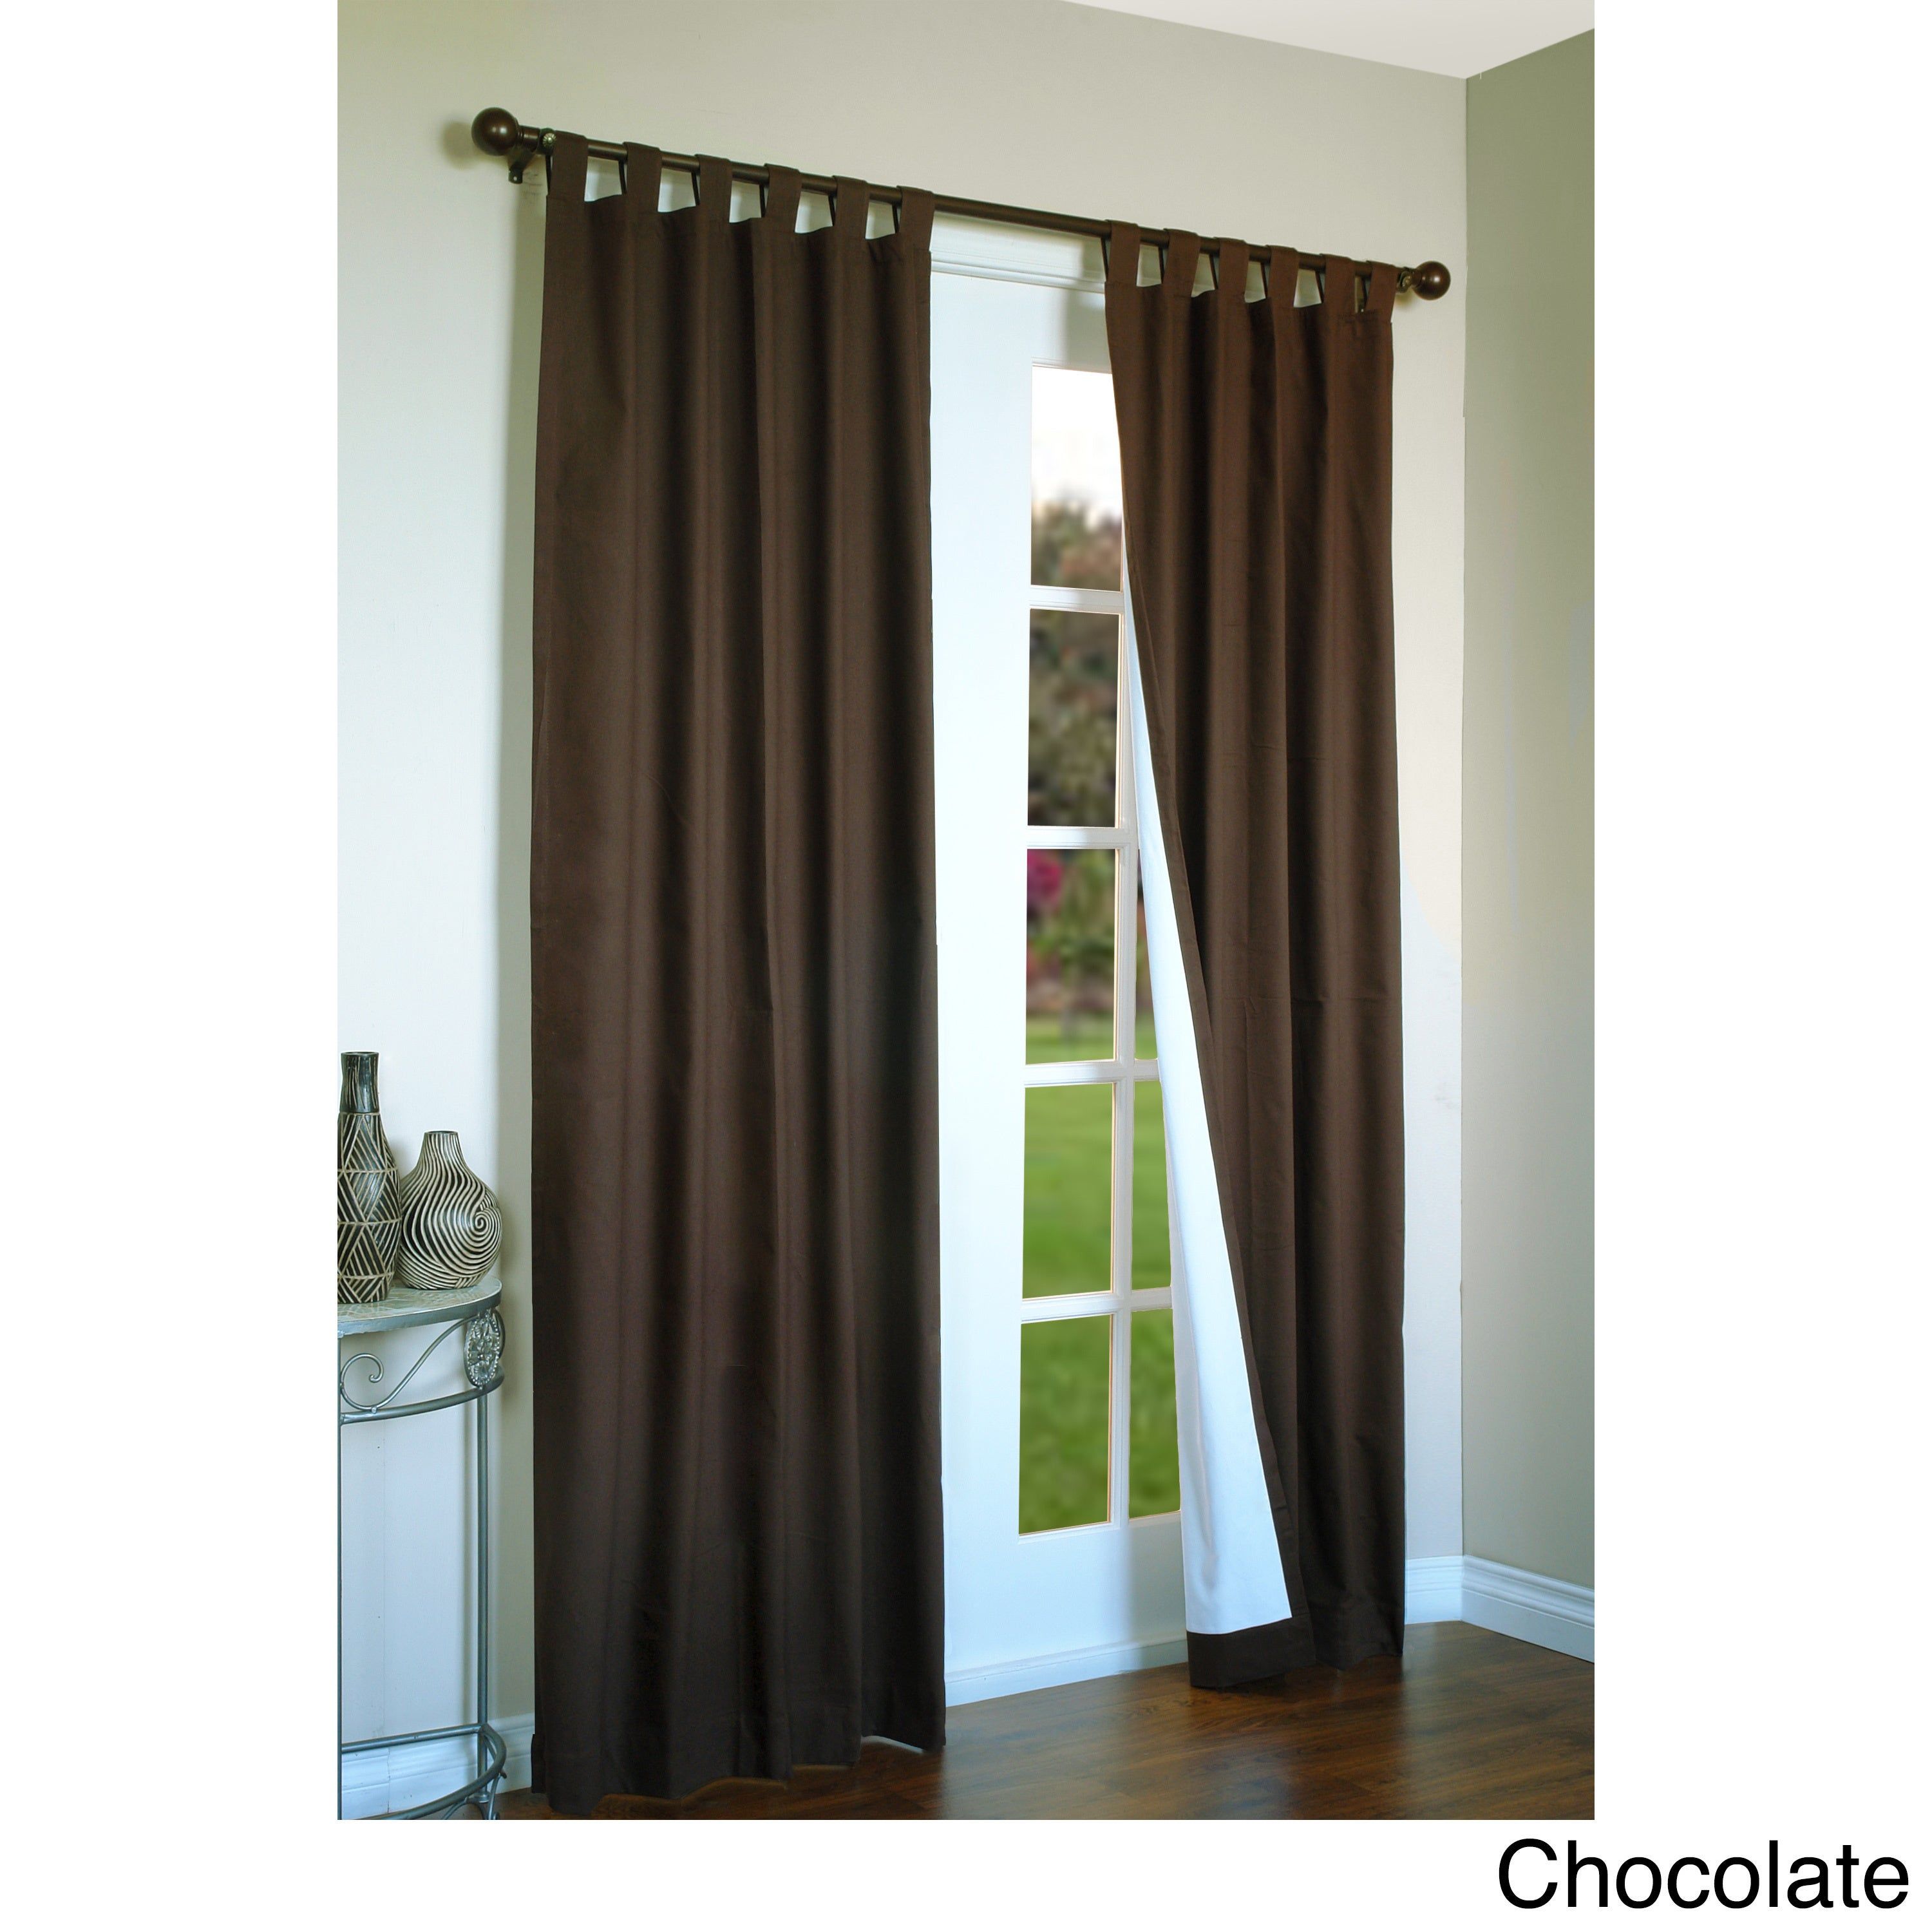 Weathermate Insulated Cotton Curtain Panel Pair Throughout Insulated Cotton Curtain Panel Pairs (View 3 of 20)